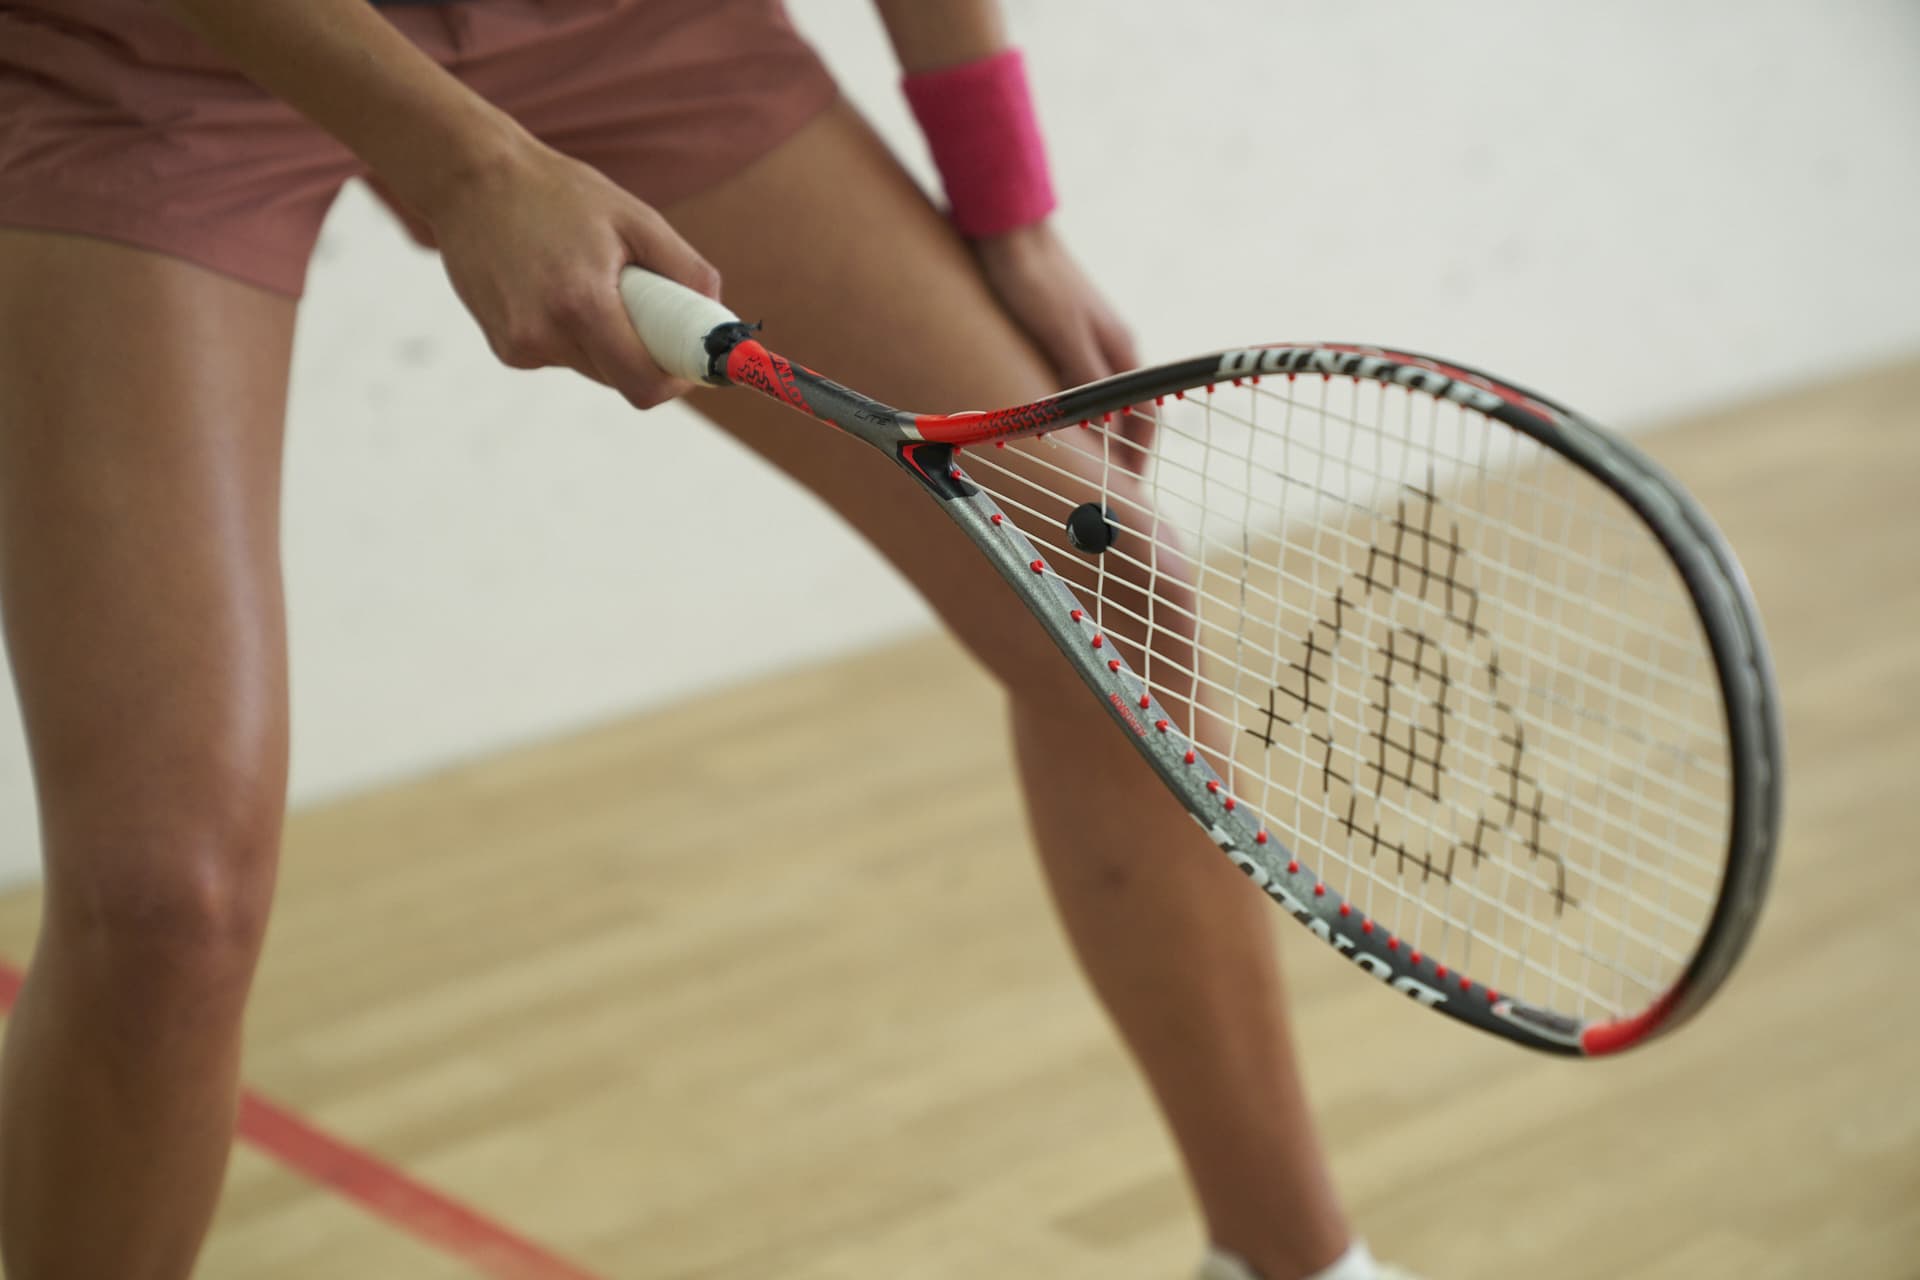 a woman holding a squash racket in her hand